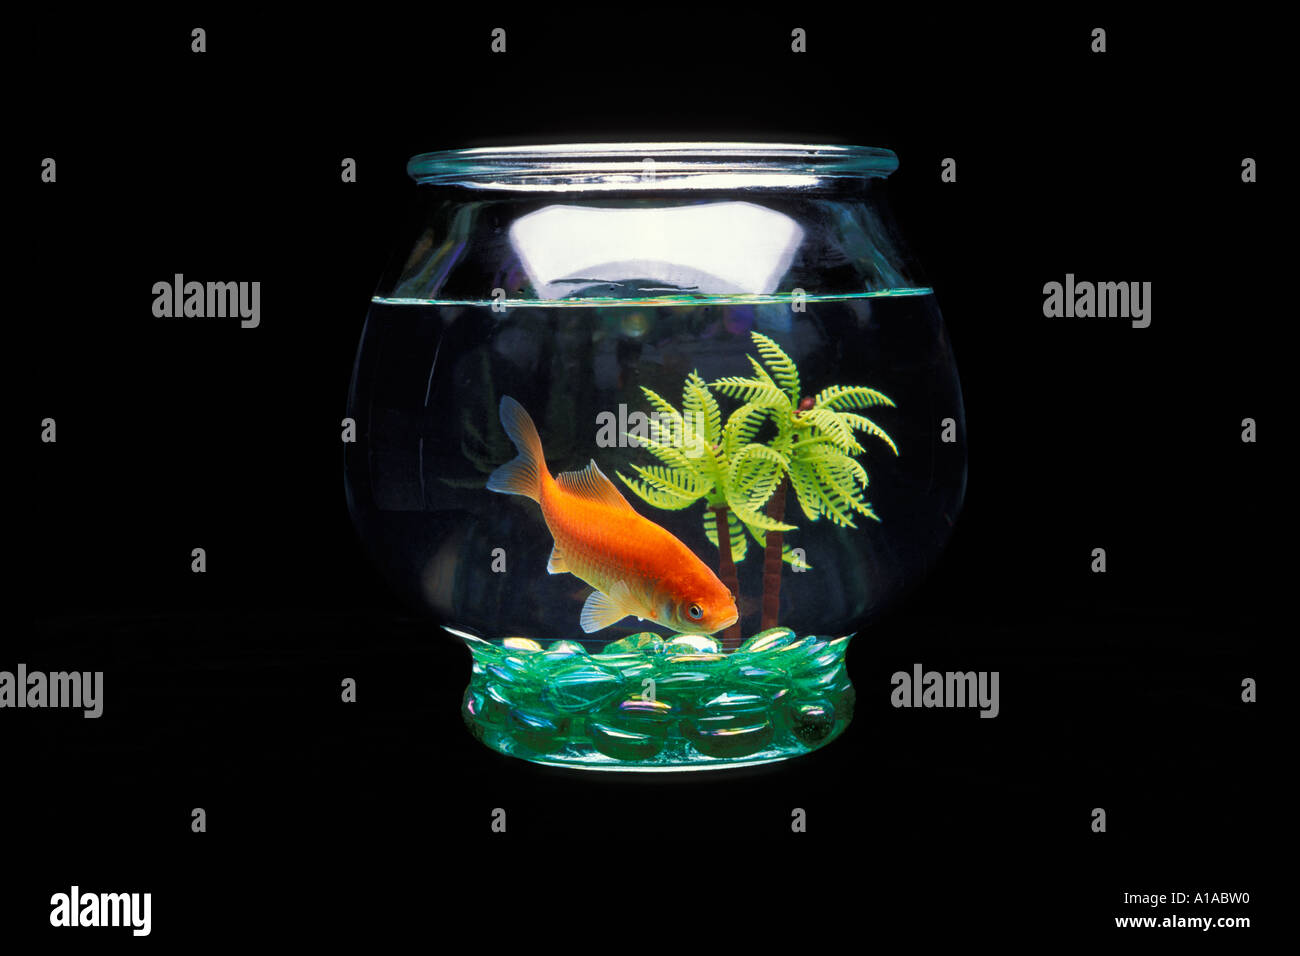 Comet goldfish in small glass fish bowl with plastic tree and green glass marbles Stock Photo